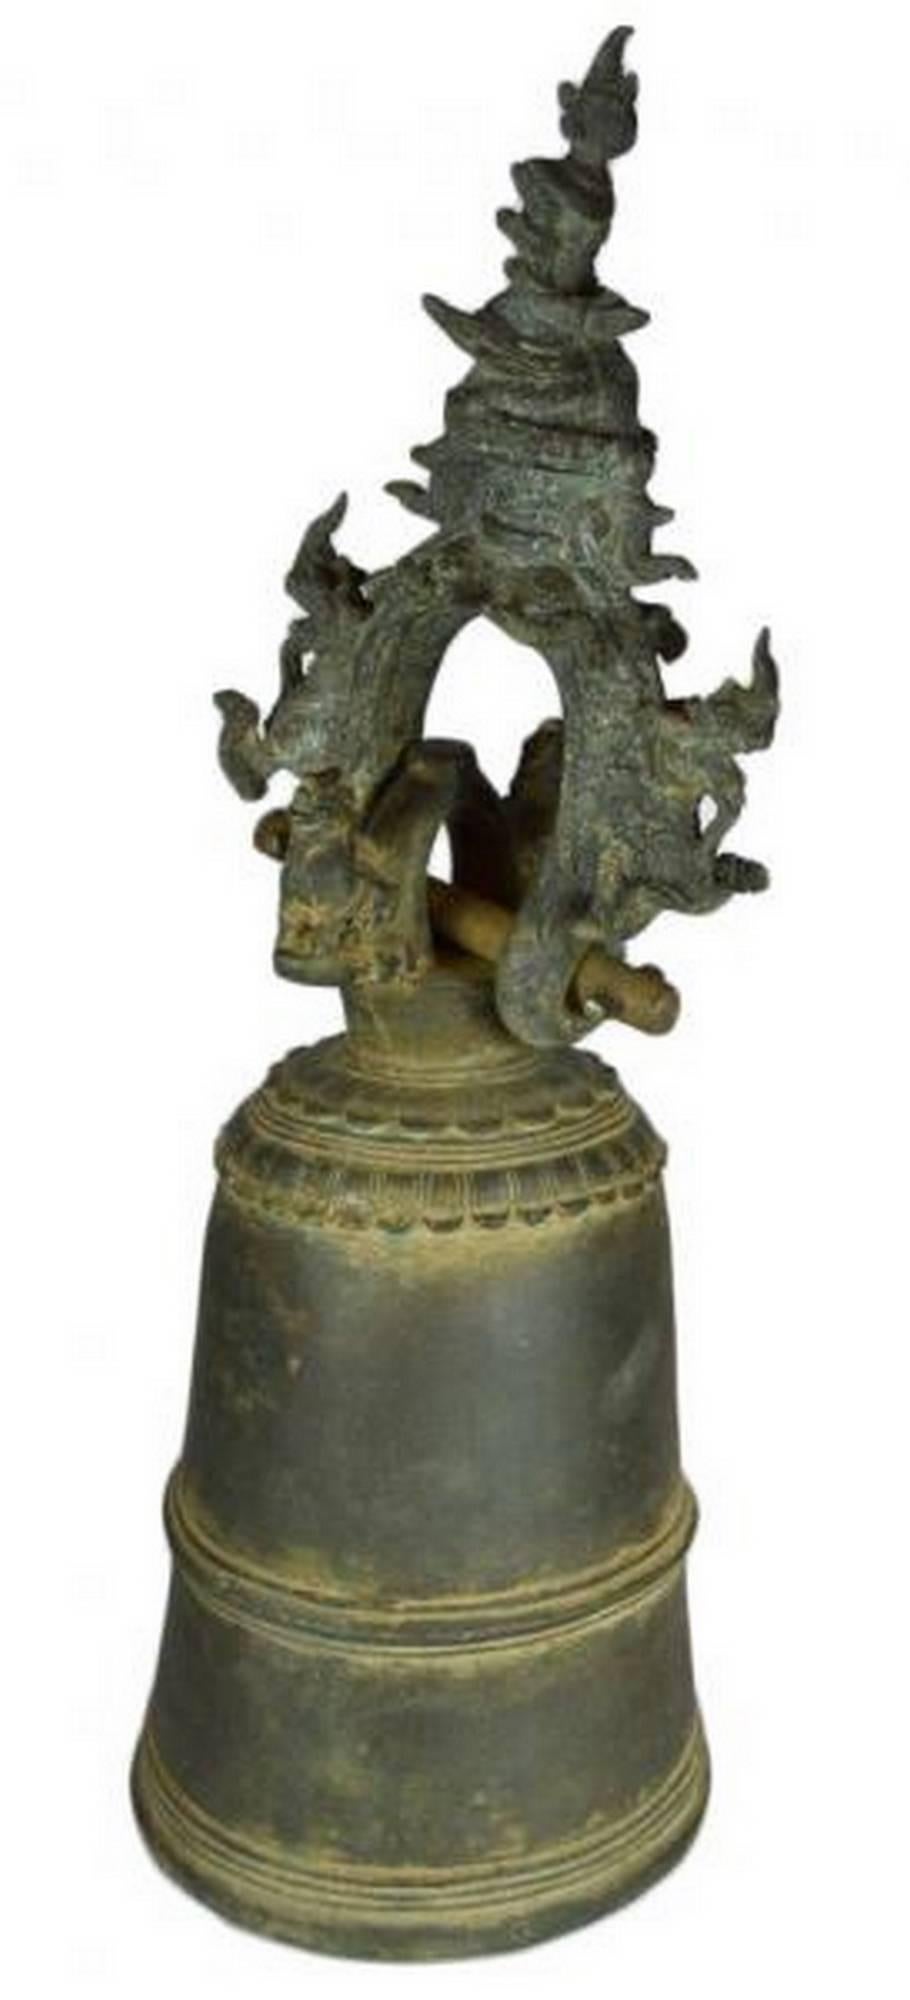 An elaborately decorated 18th century bronze bell from Burma. This bell features a tall belly with three decorative rings, the top ring featuring petal motifs. The bell can be hung thanks to a ring displaying a rich foliage and lion adornment and